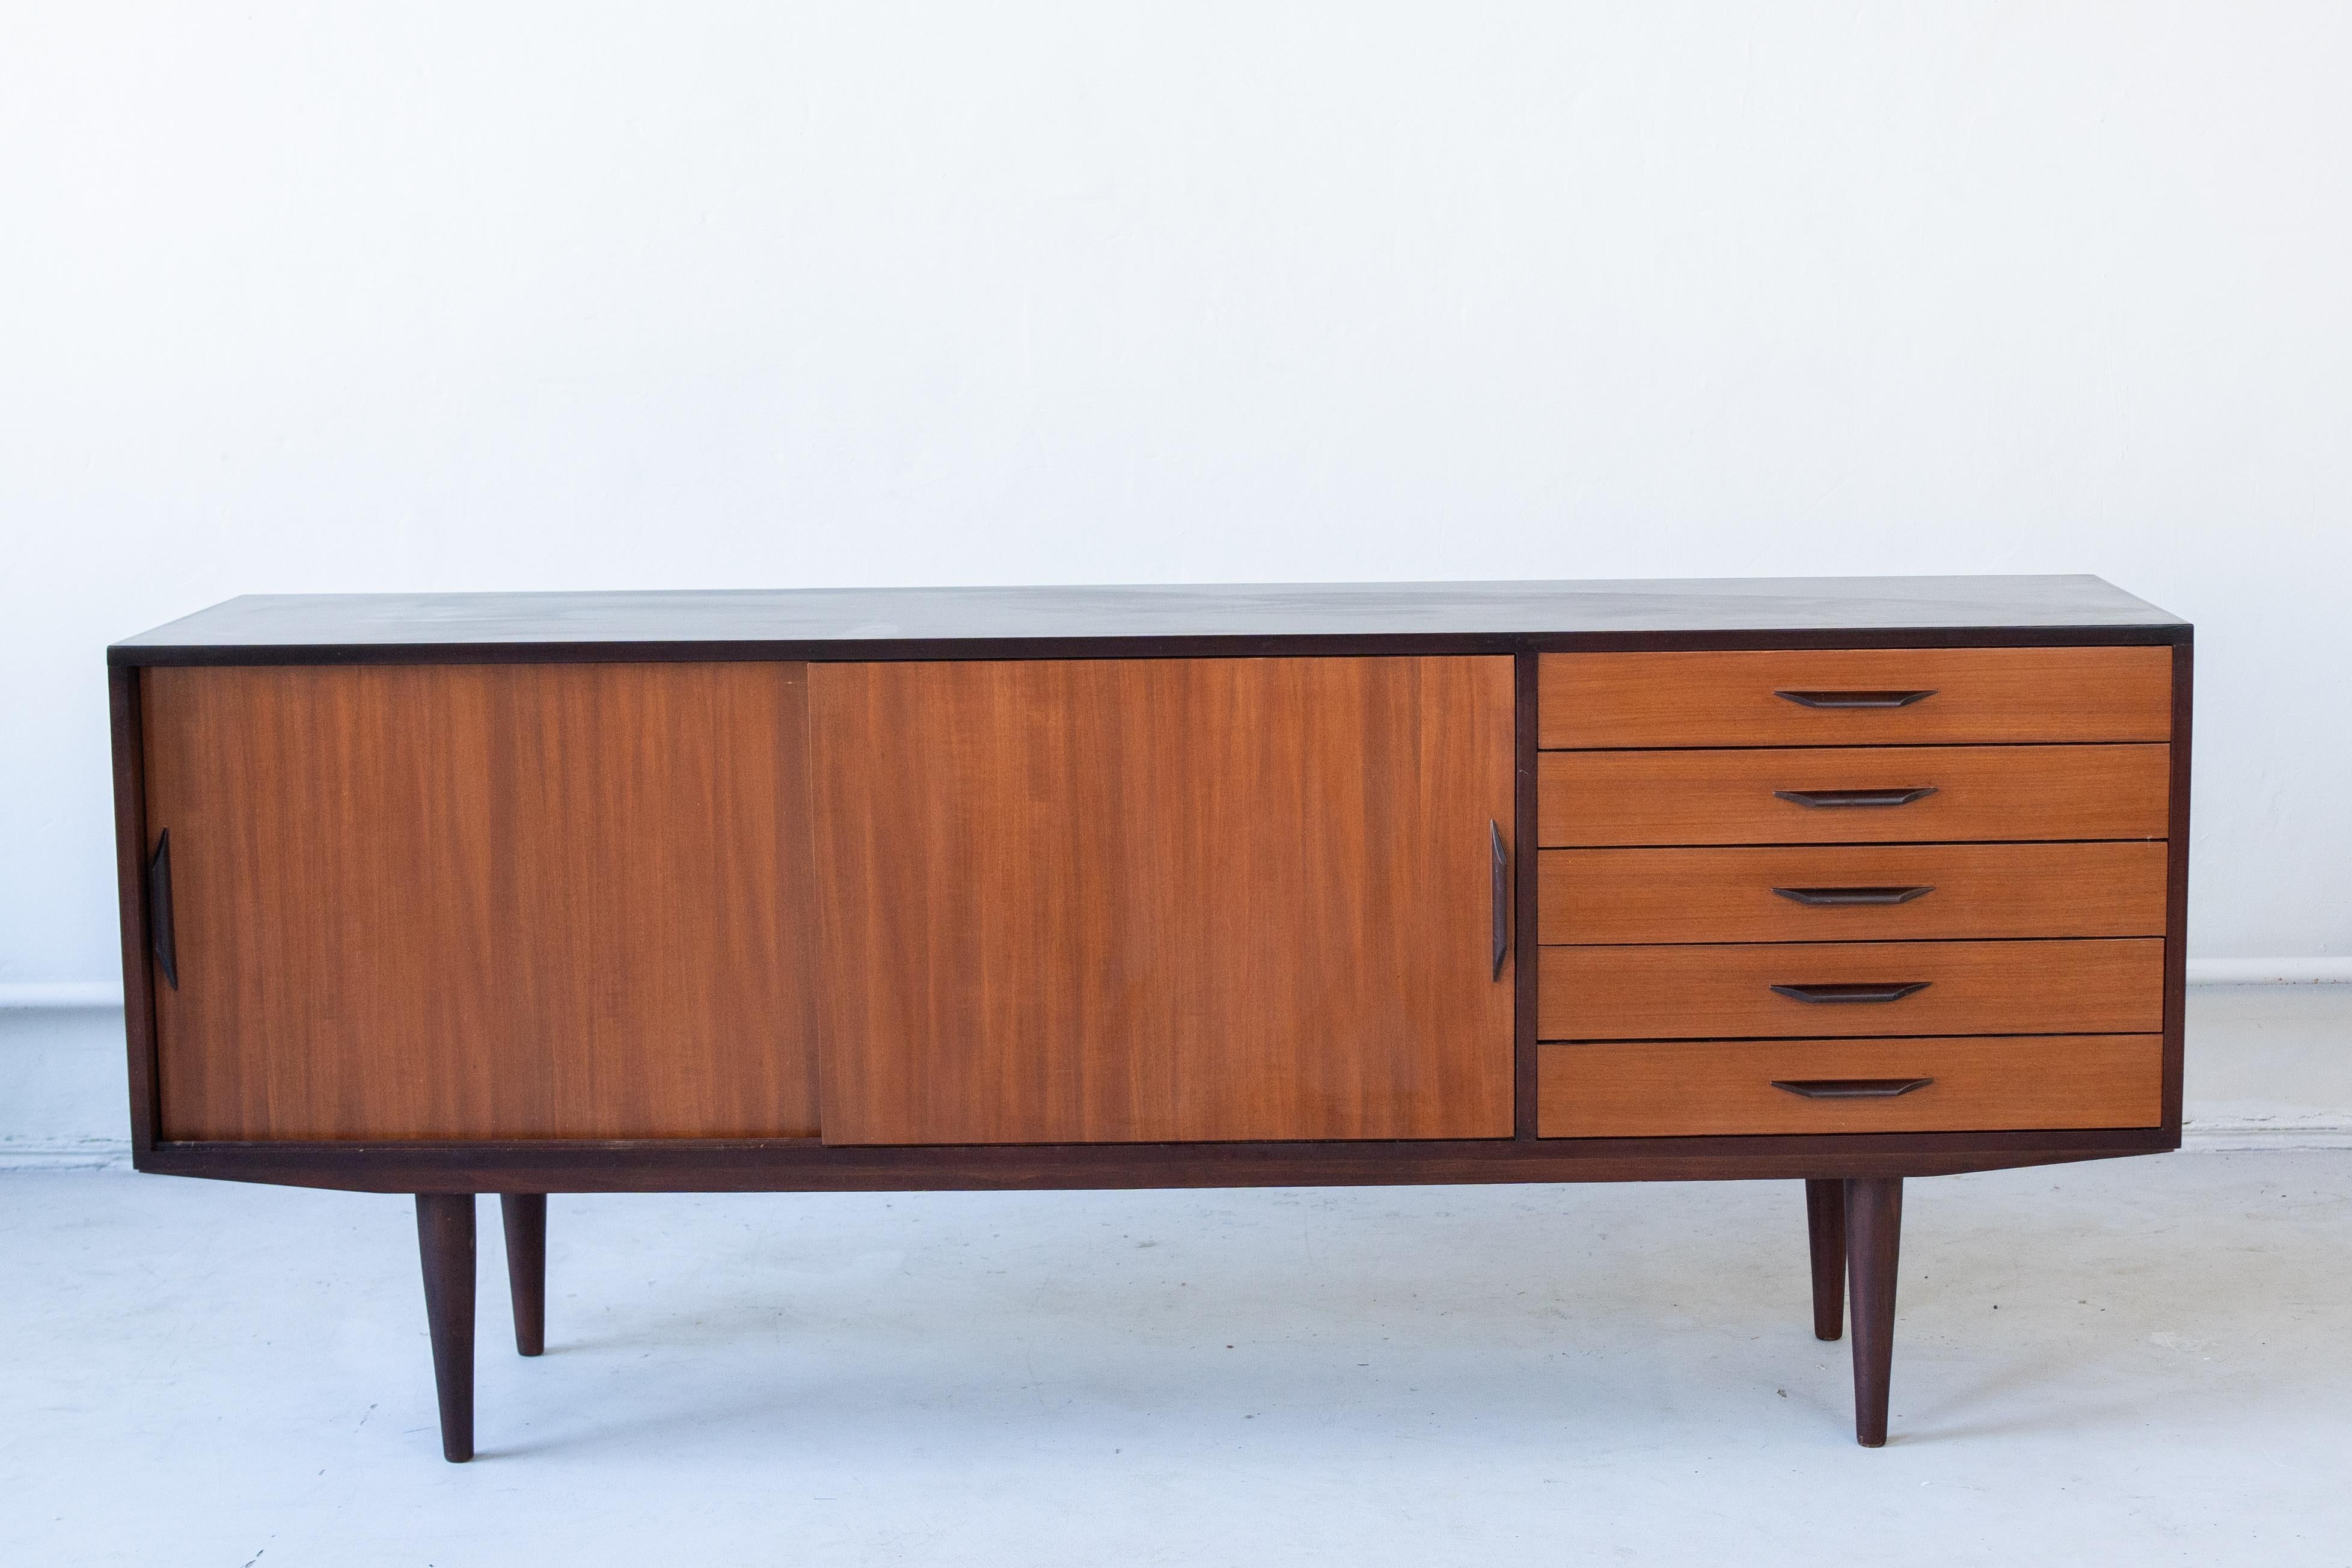 Mid-century, Danish stile wooden sideboard,
In the left hand side there are sliding doors, in the right hand side there are 5 draws. 
This piece is very elegant and functional.